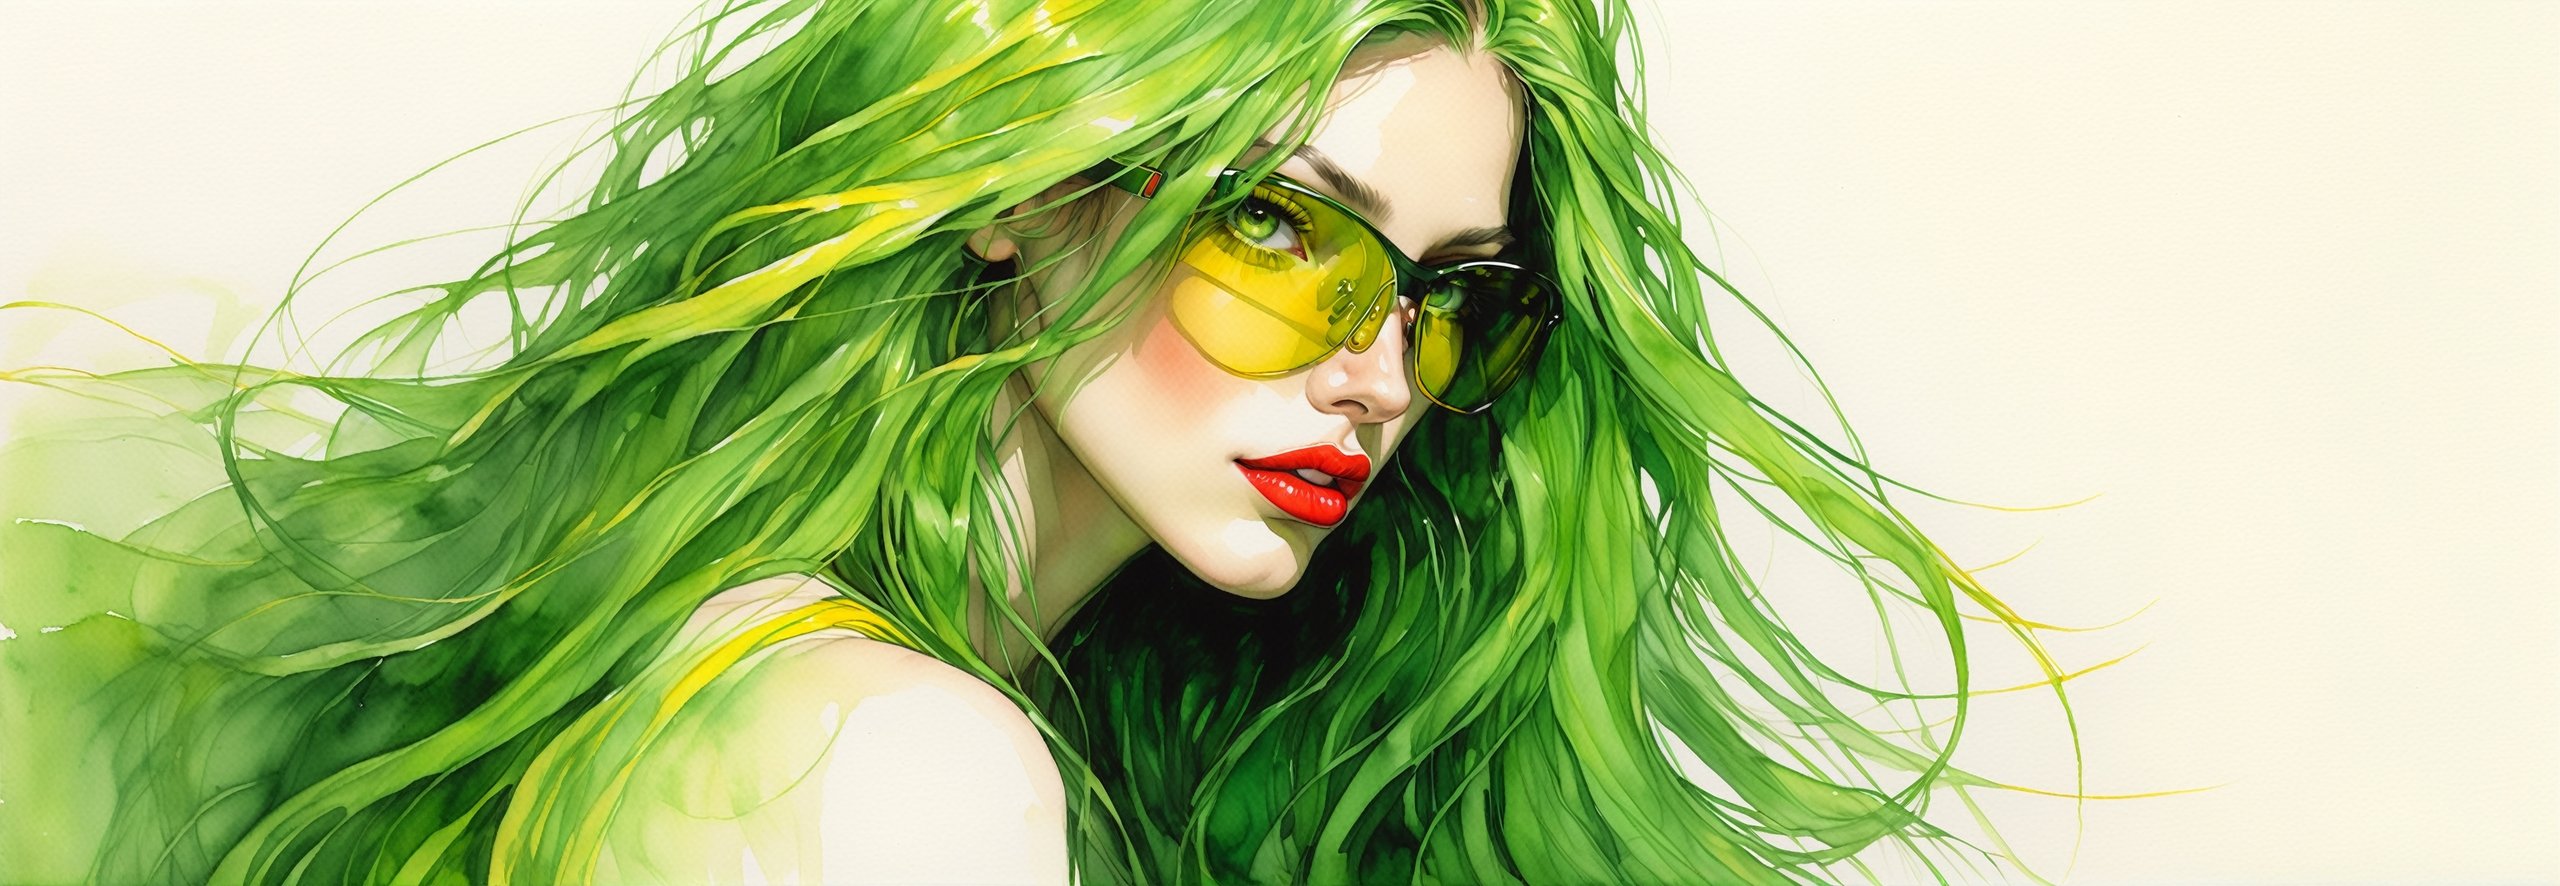 pencil Sketch of a beautiful  athletic woman 30 years old, , green long hair, yellow shades, disheveled alluring, ((hafe body)), portrait by Charles Miano, ink drawing, illustrative art, soft lighting, detailed, more Flowing rhythm, elegant, low contrast, add soft blur with thin line, full red lips, green eyes, black clothes.